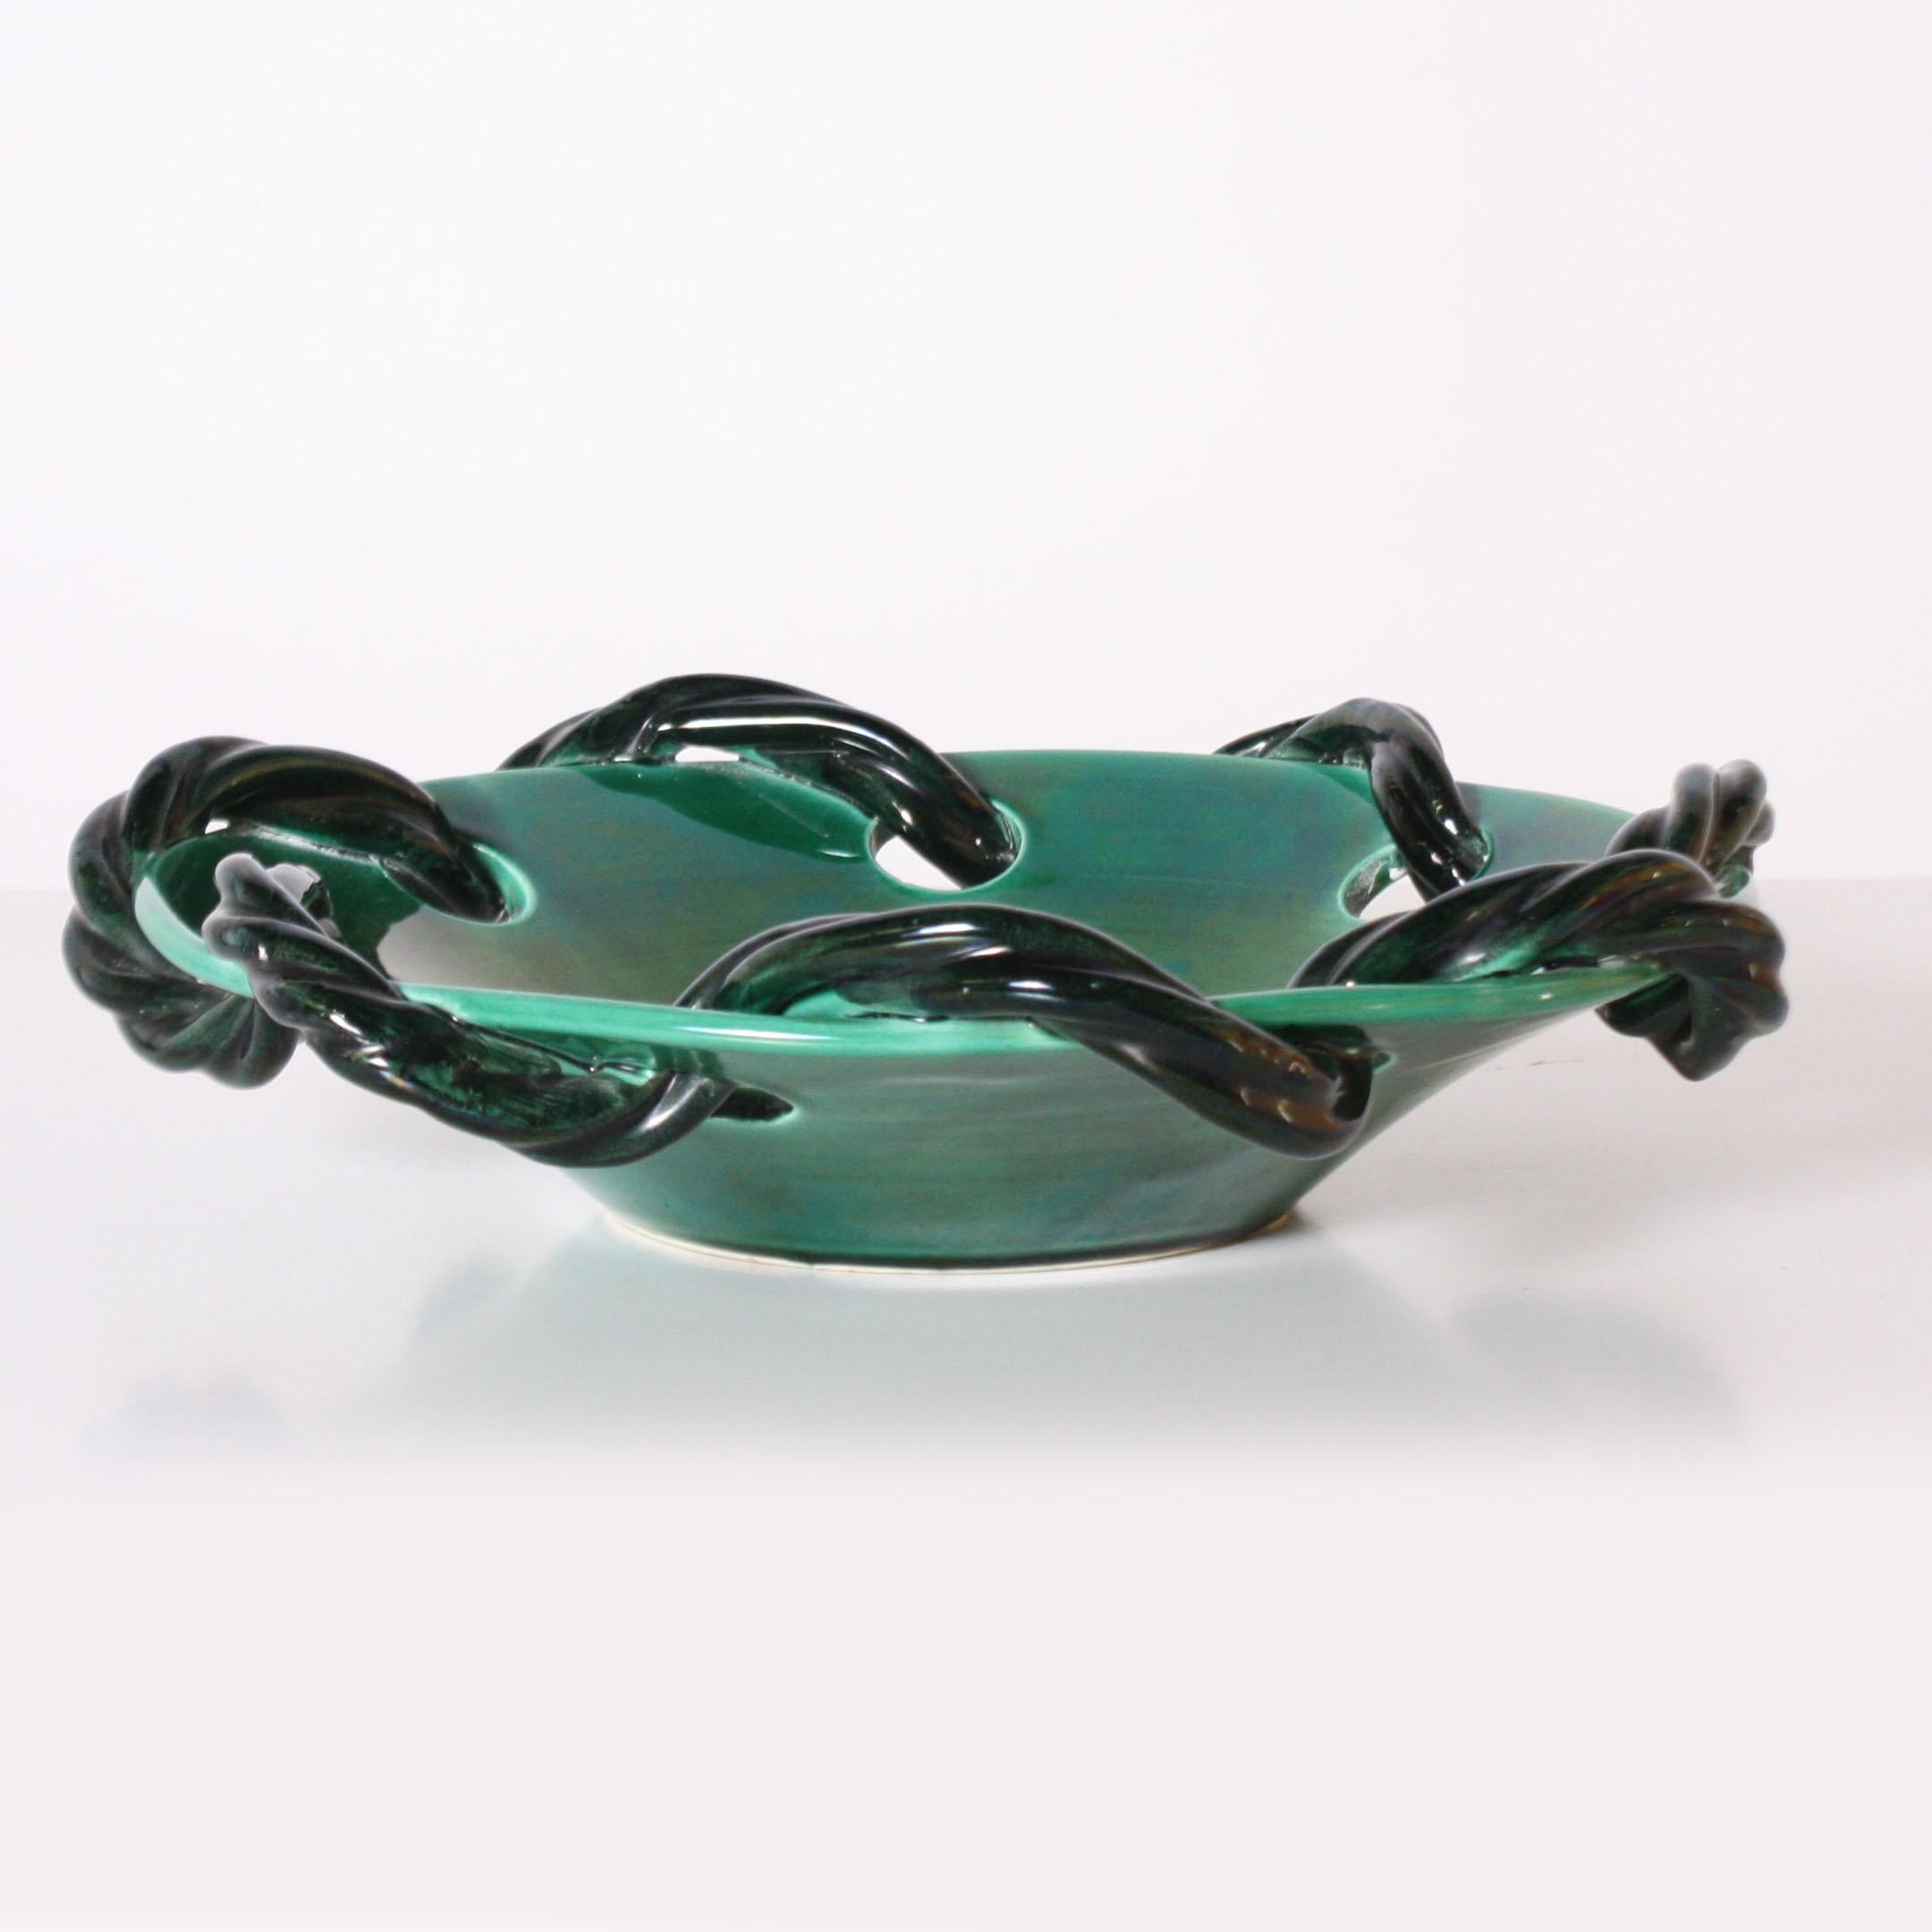 Turquoise ceramic bowl from Vallauris with rope detail, circa 1950
$950